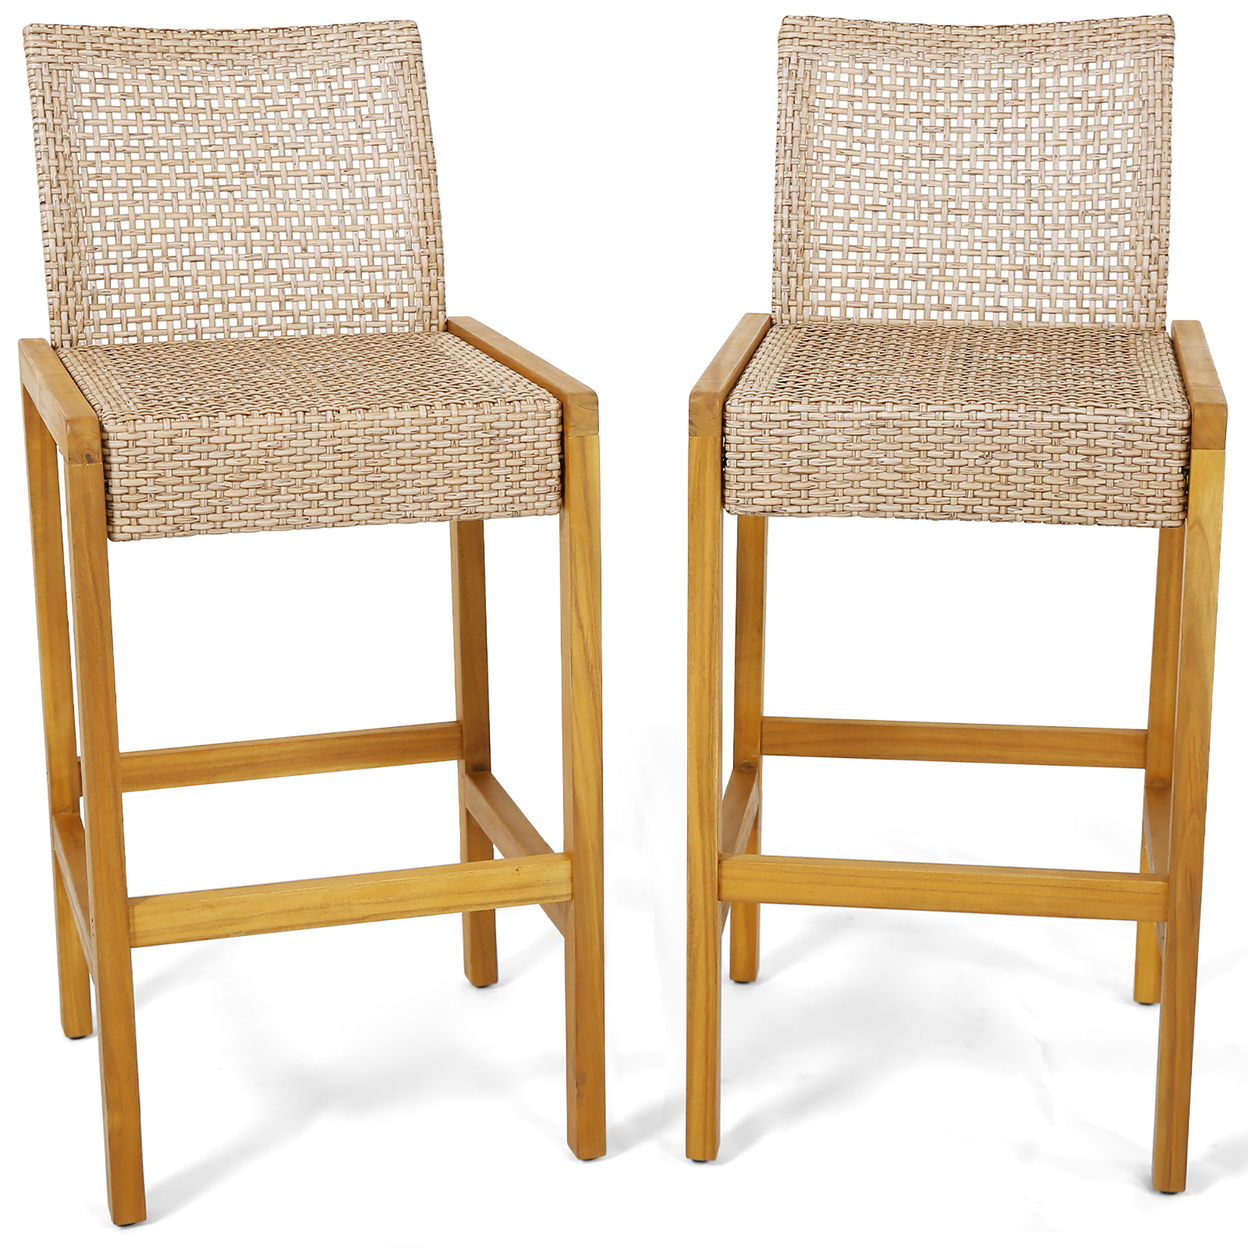 Wicker Bar Stools Set Of 2 Patio Chairs W/ Solid Wood Frame Ergonomic Footrest Light Brown